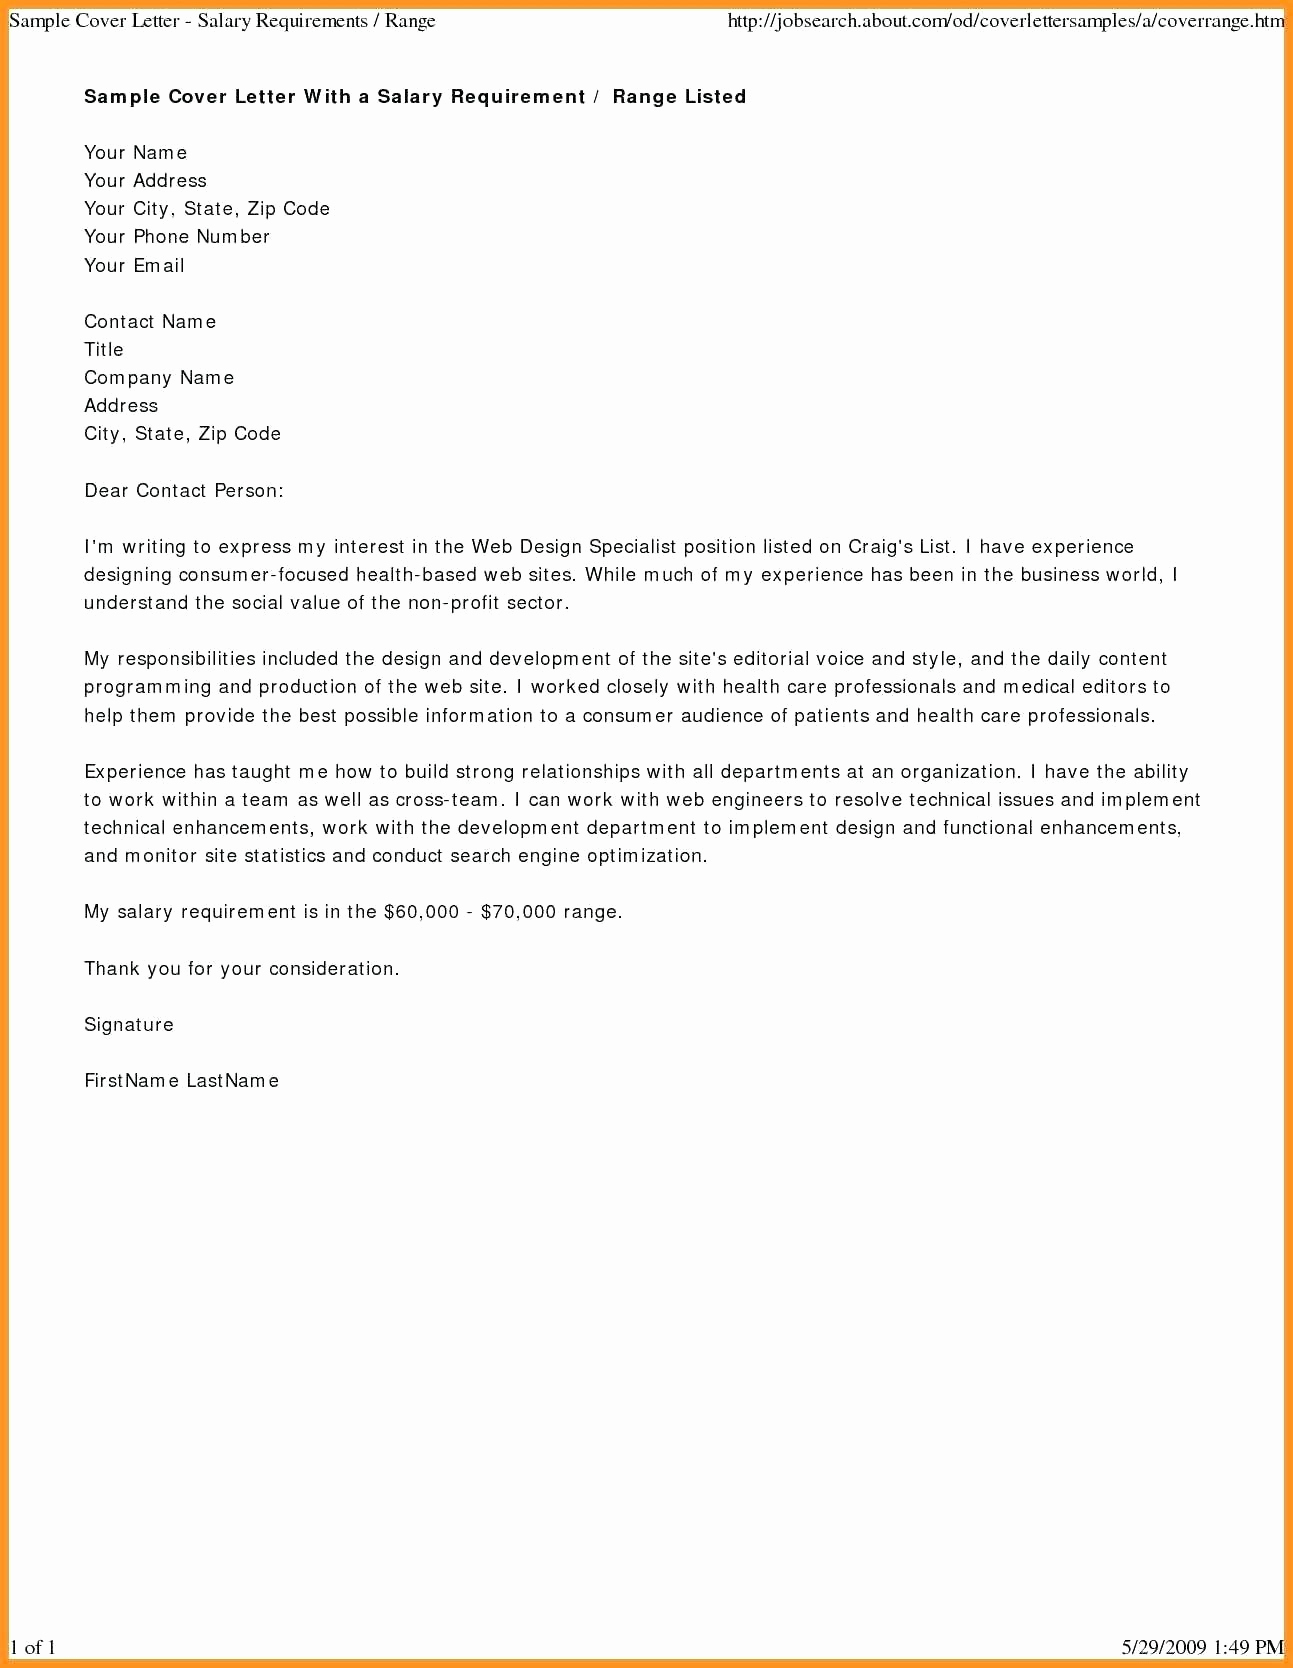 Vacation Request Letter Template - How to Write Cover Letter Sample Fresh Letter Template for Vacation